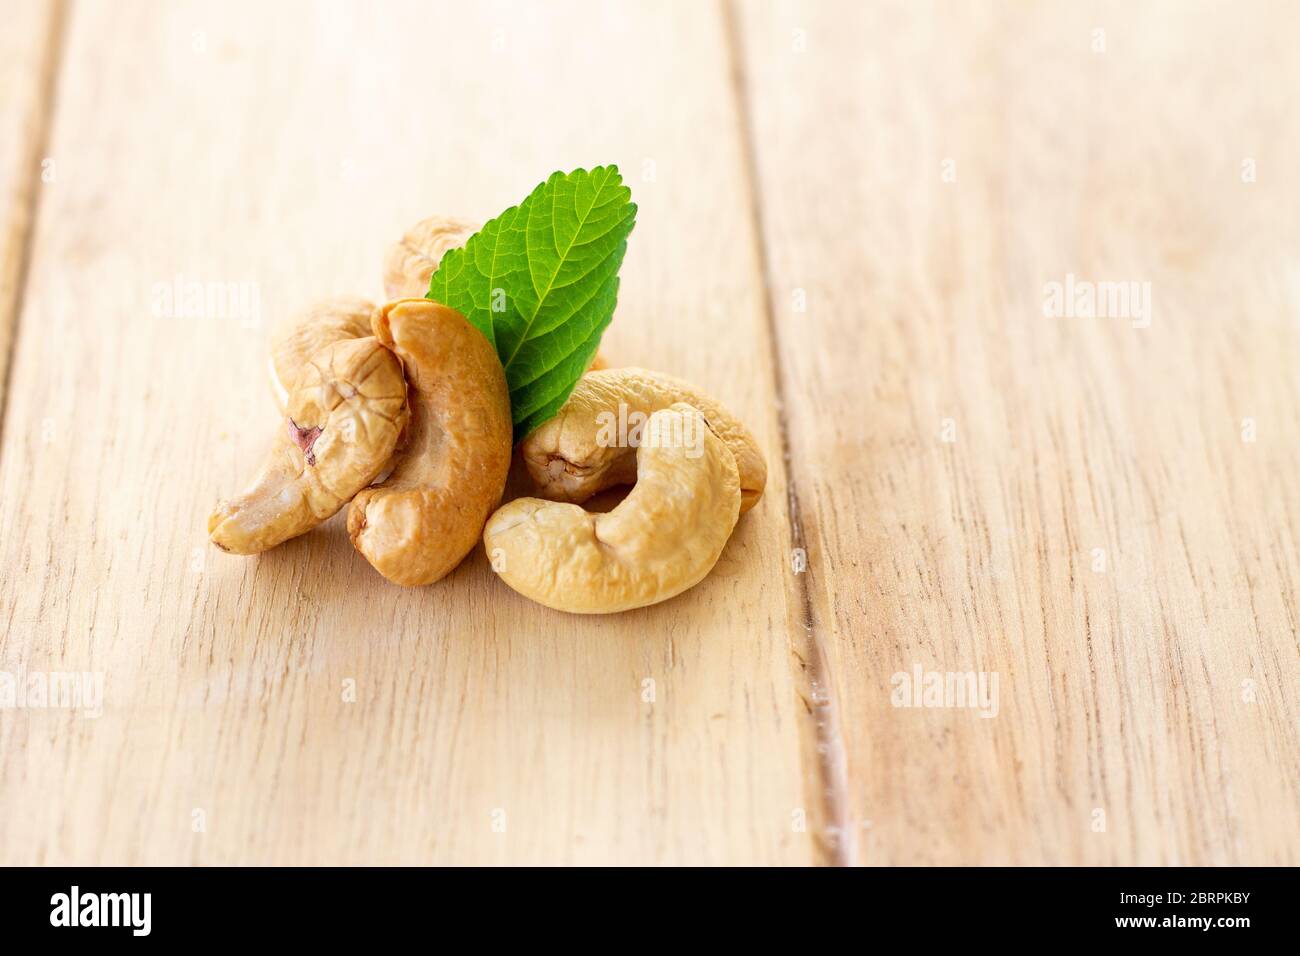 many cashew nut with green leaf on wooden table Stock Photo